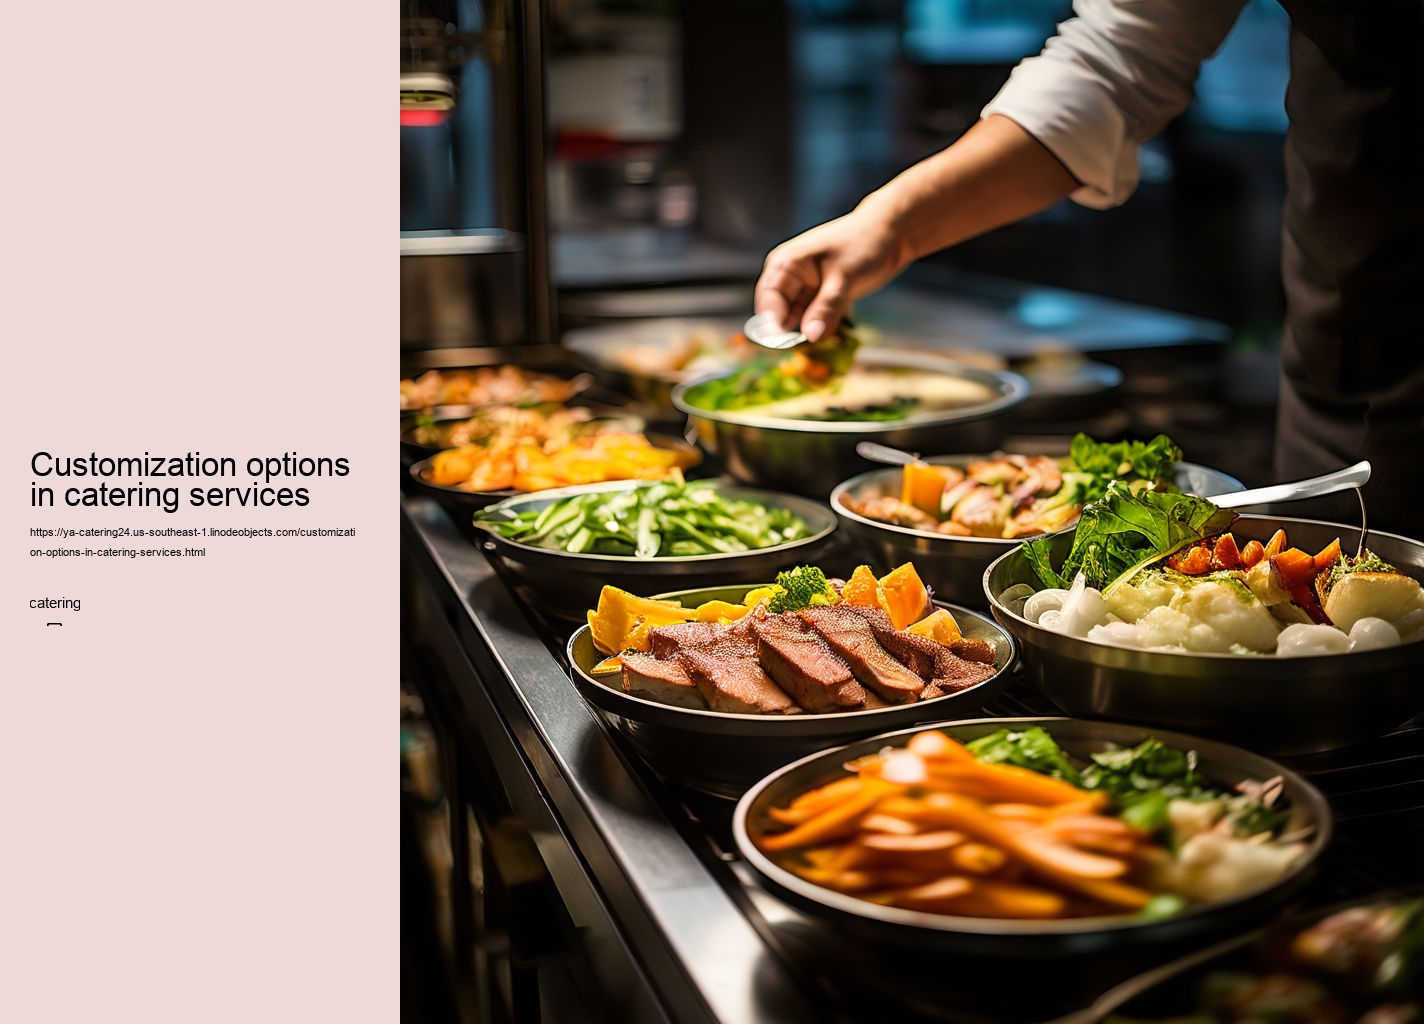 Customization options in catering services